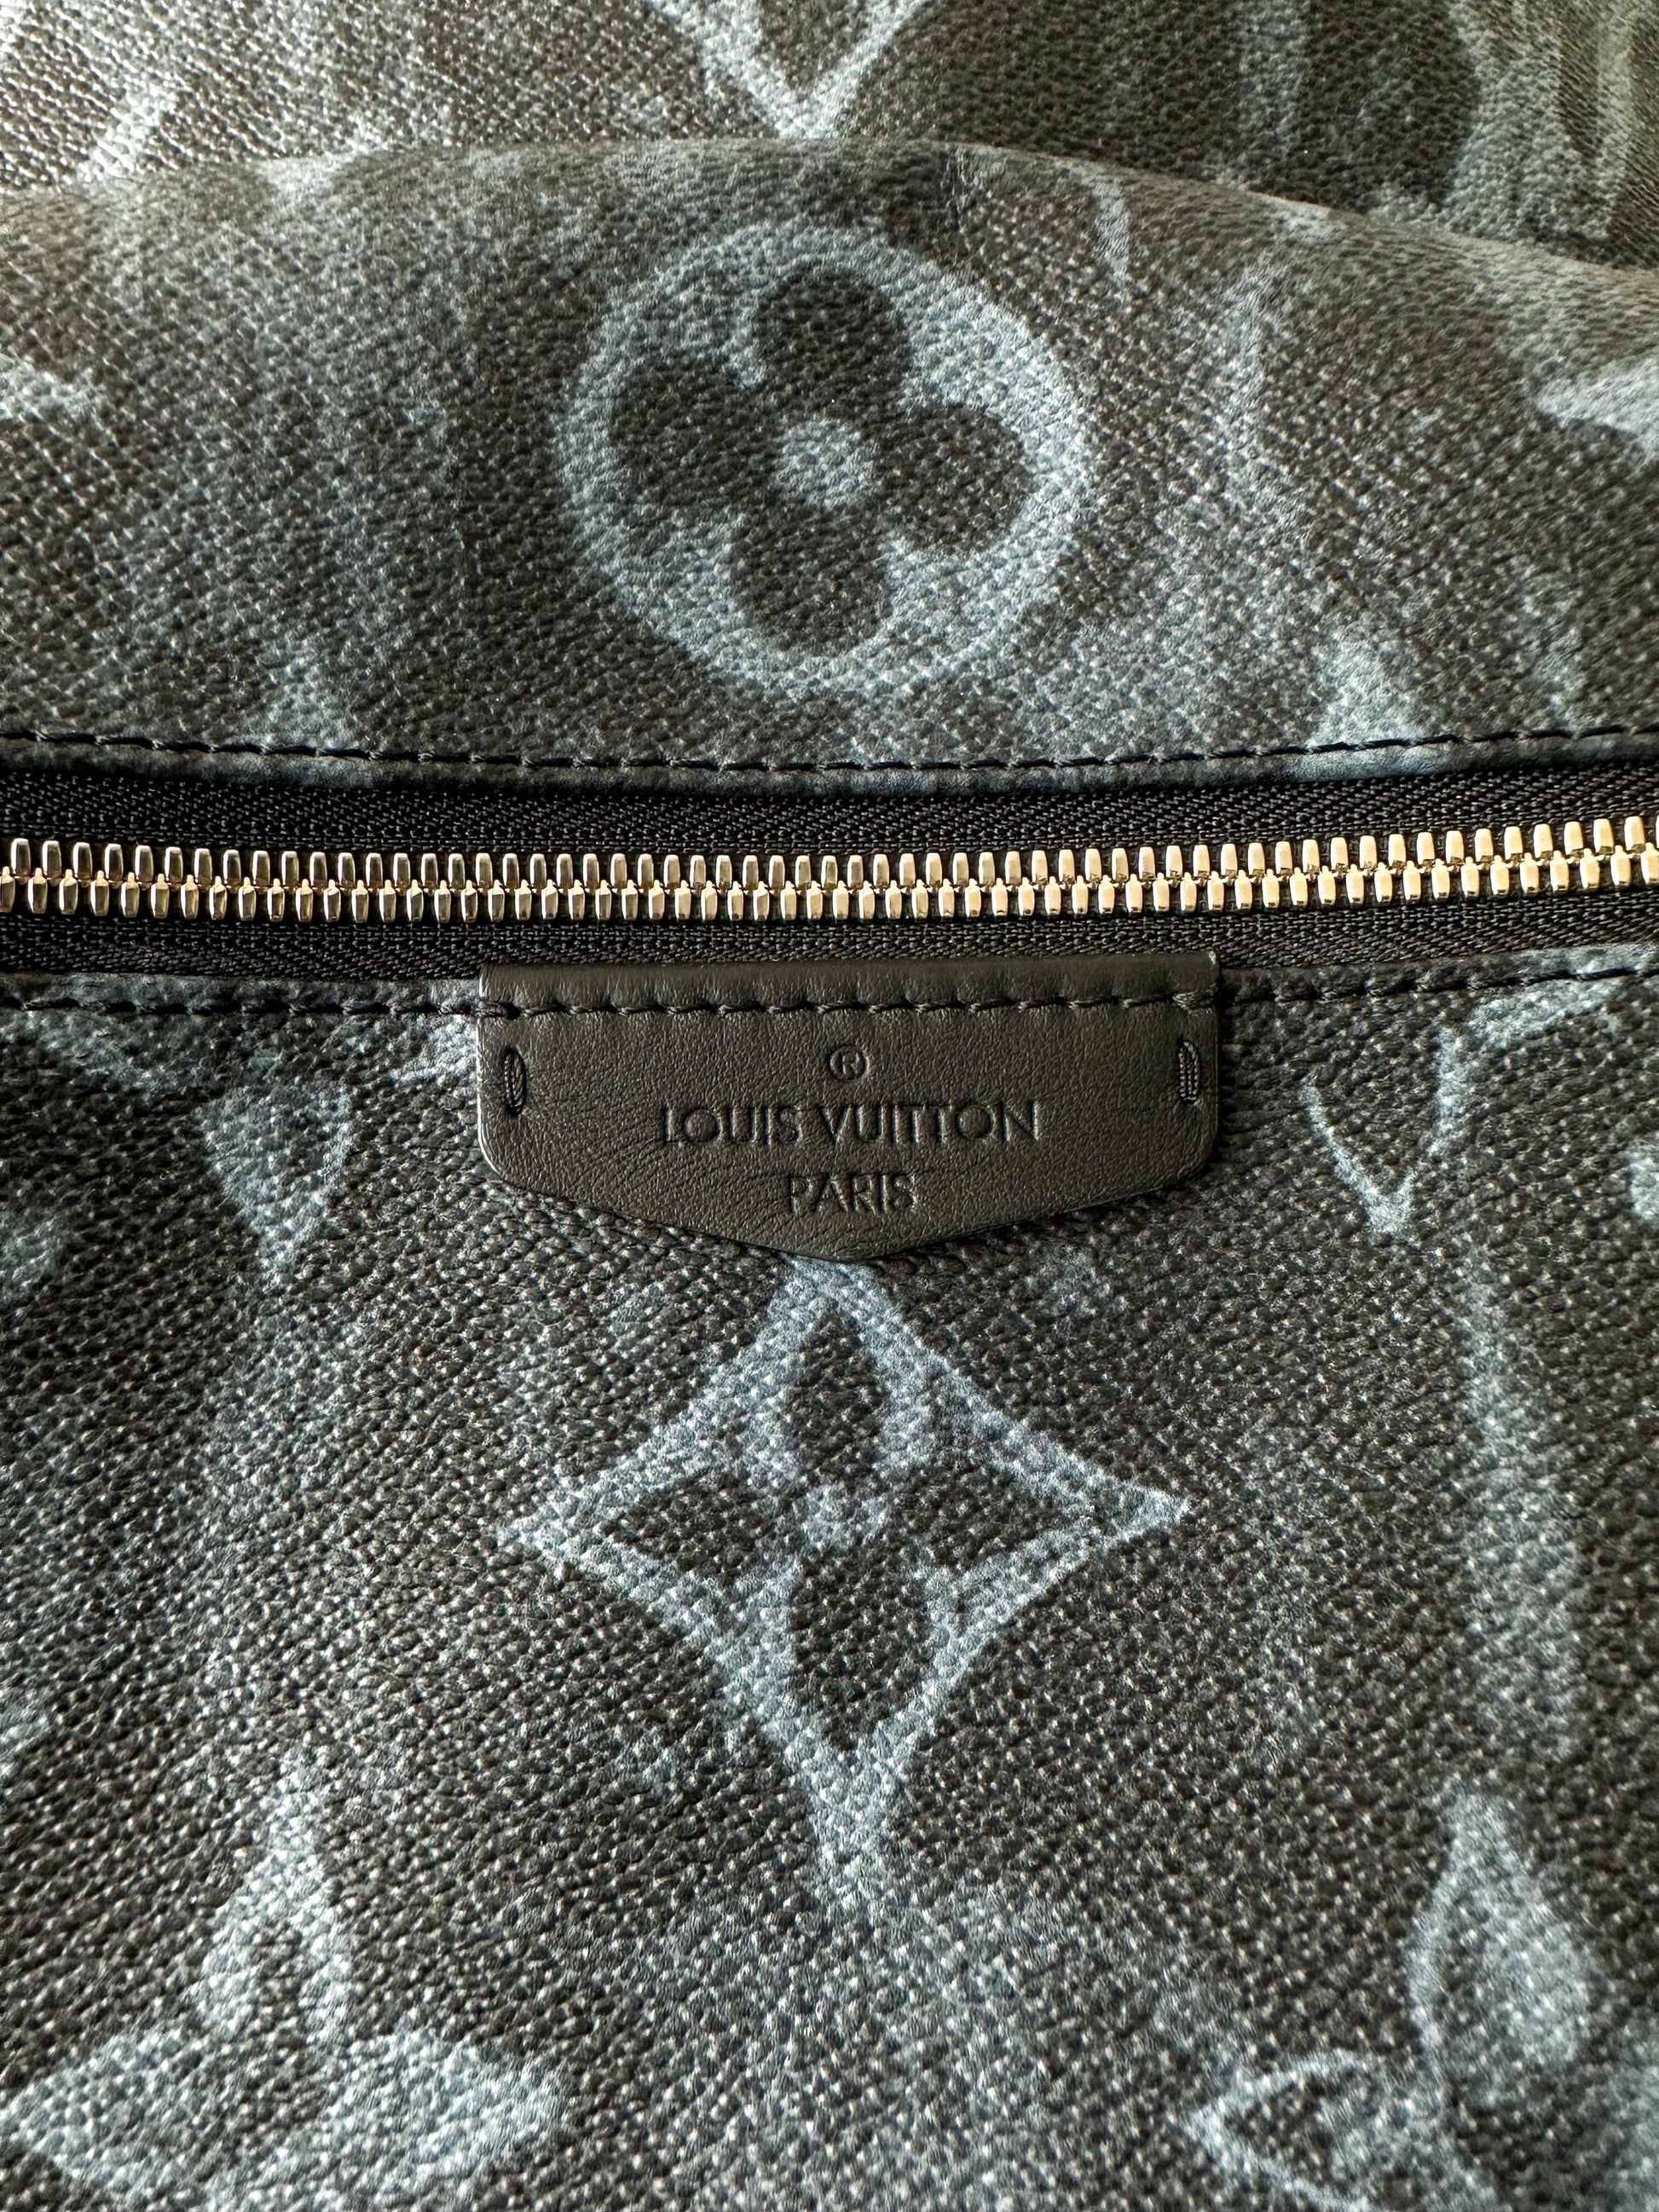 LOUIS VUITTON Taurillon Leather Discovery Backpack Louis Vuitton